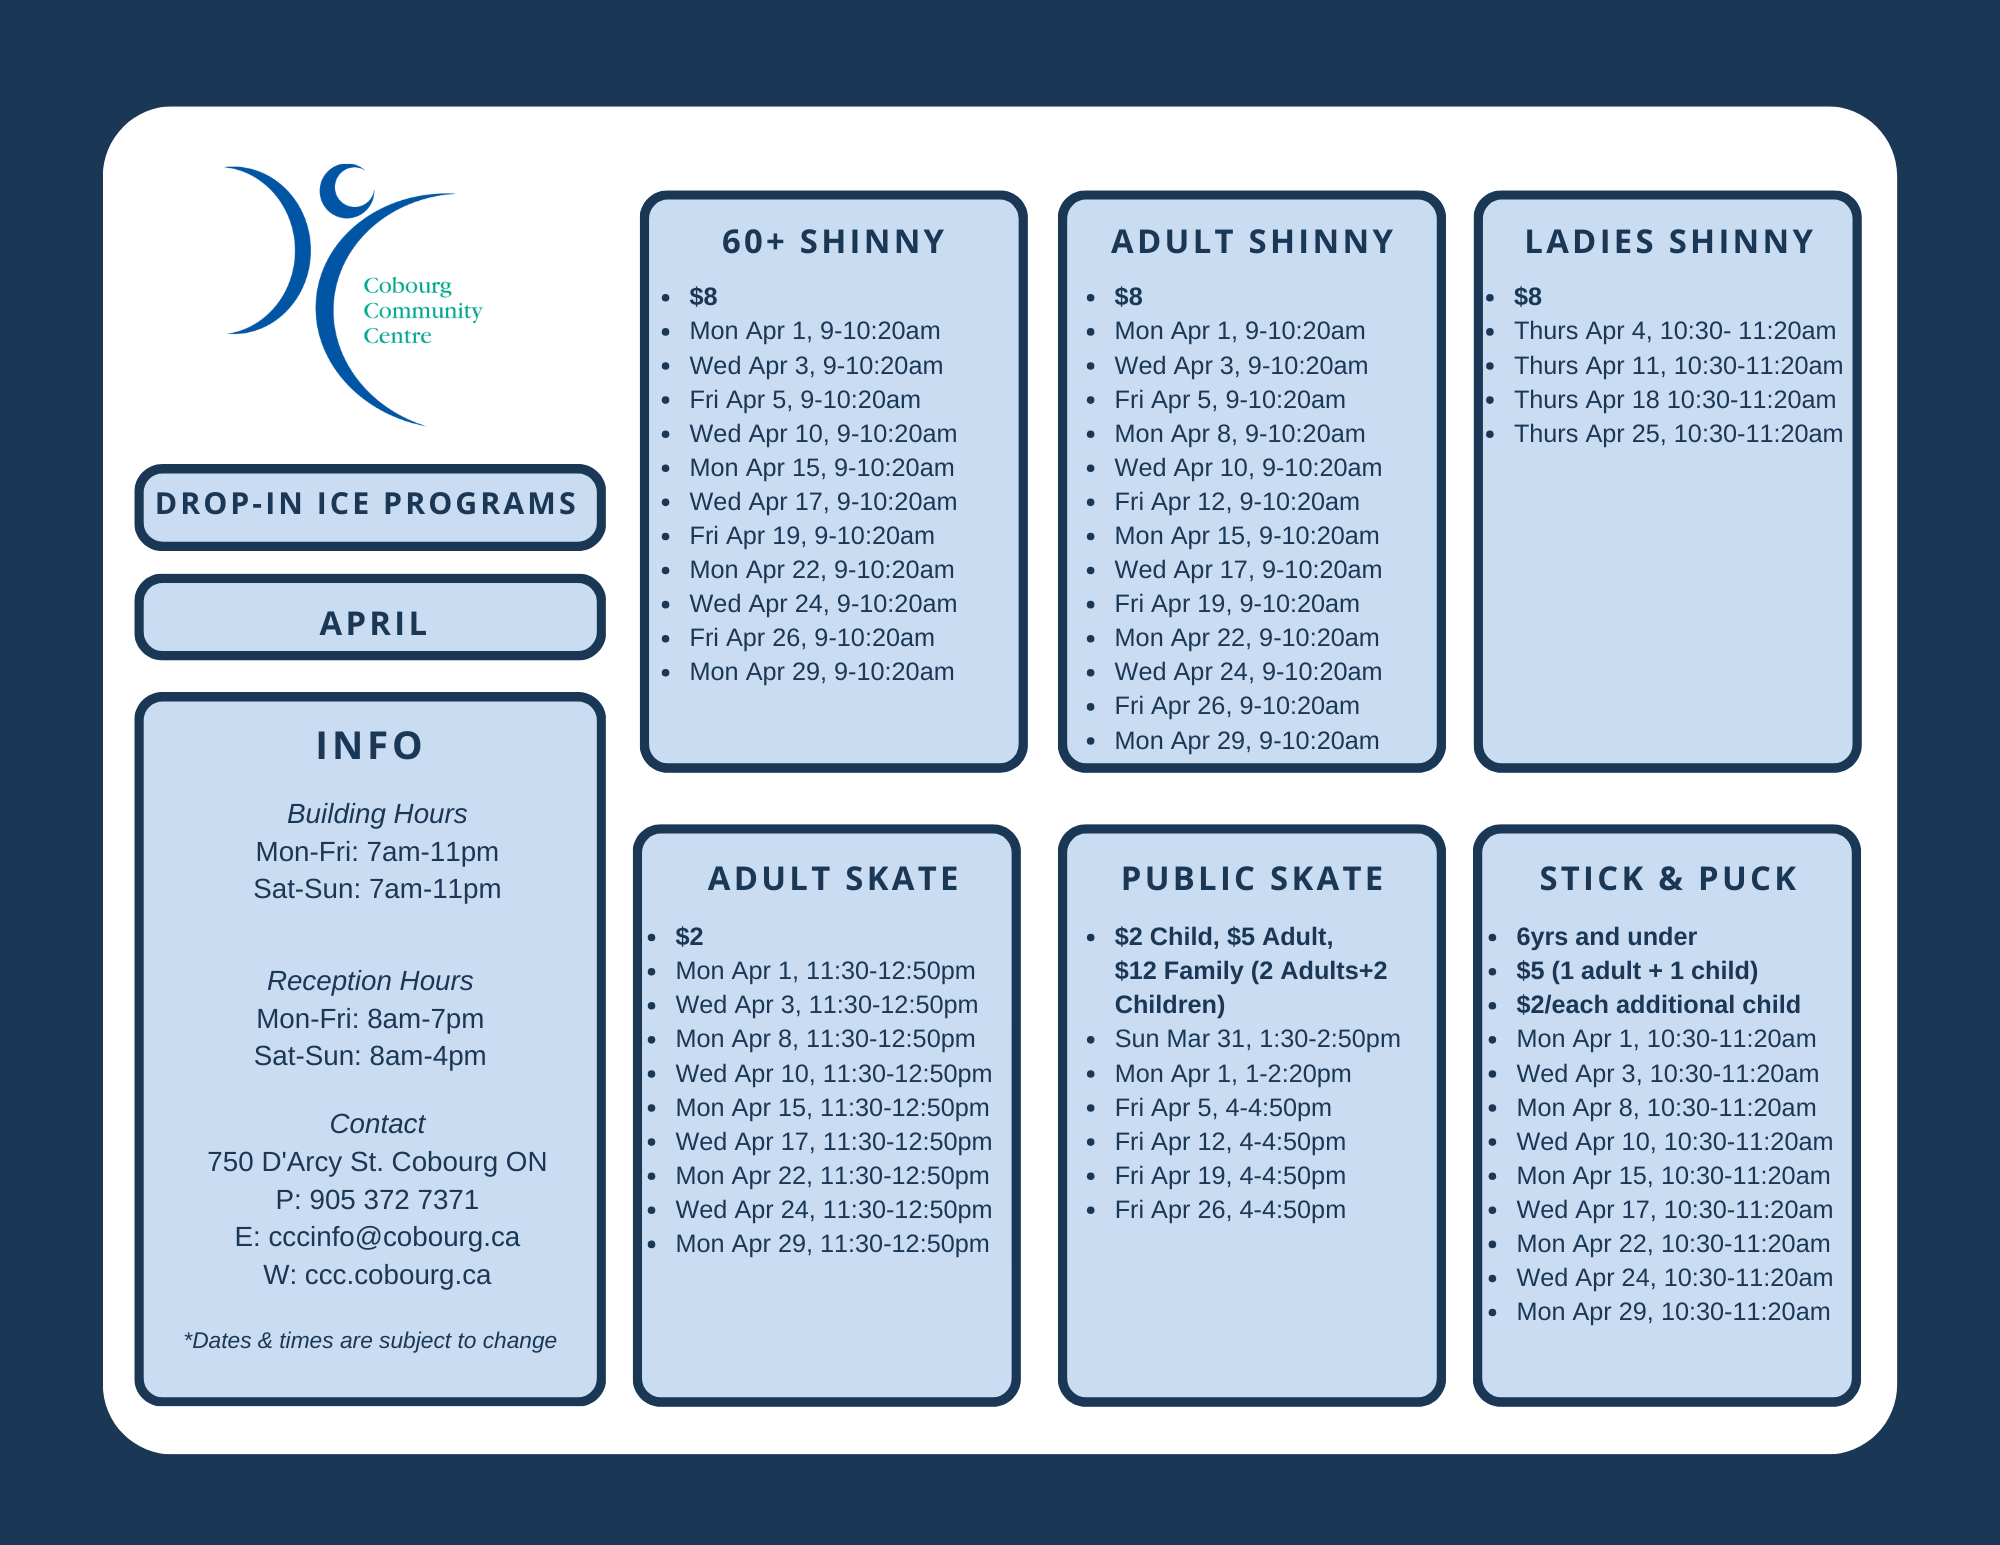 Schedule of Ice programs in April